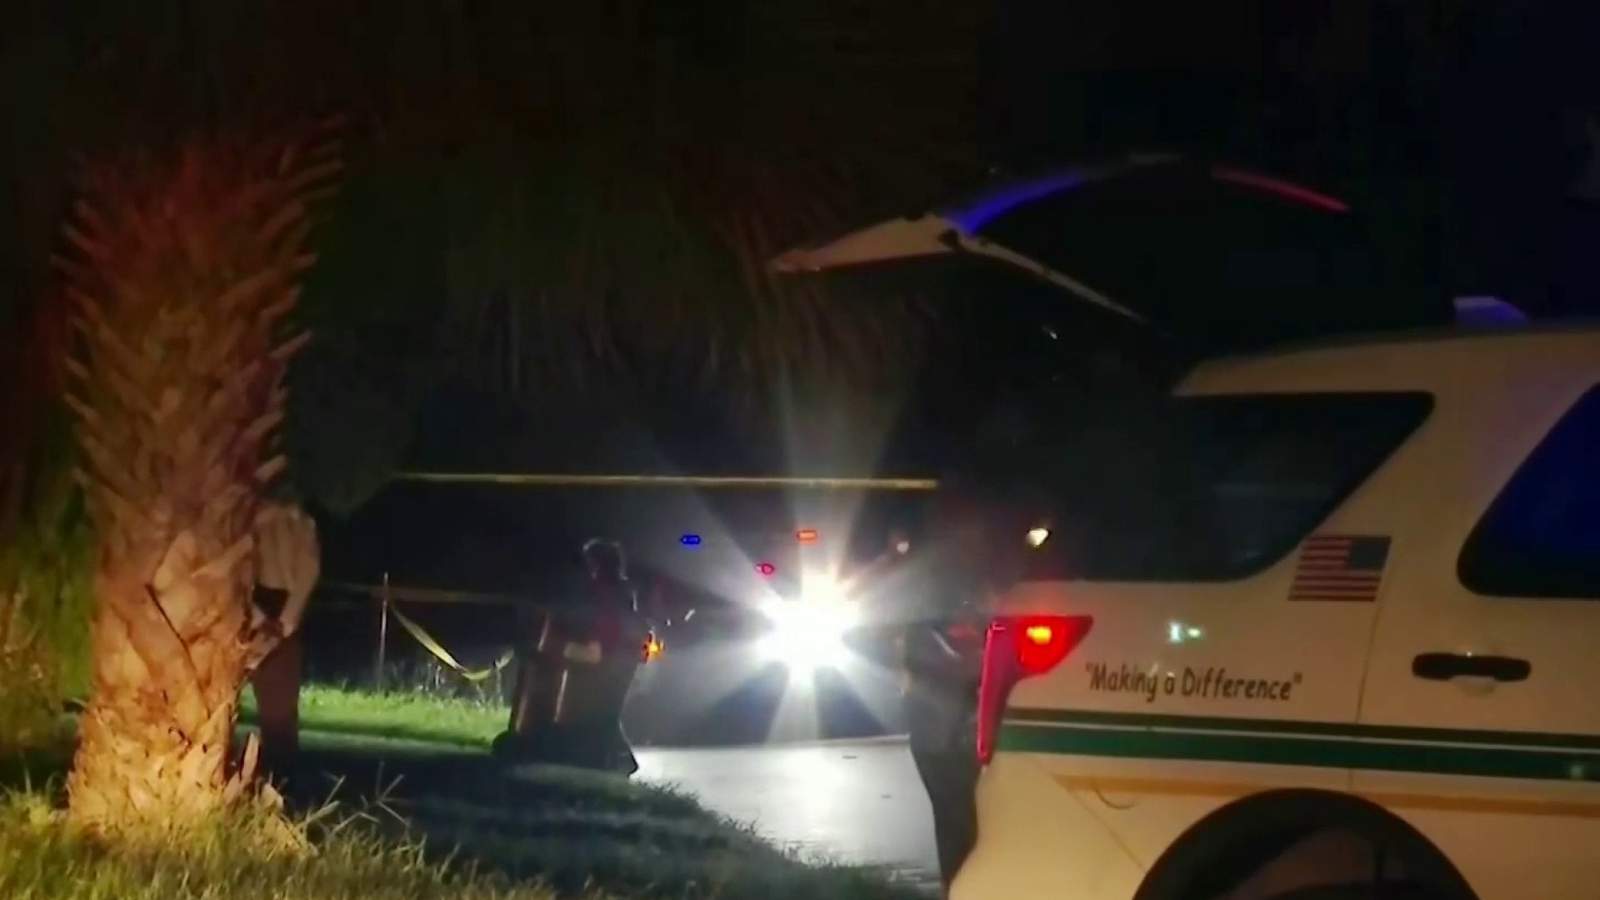 14-year-old killed, 15-year-old critically injured in Orange County shooting